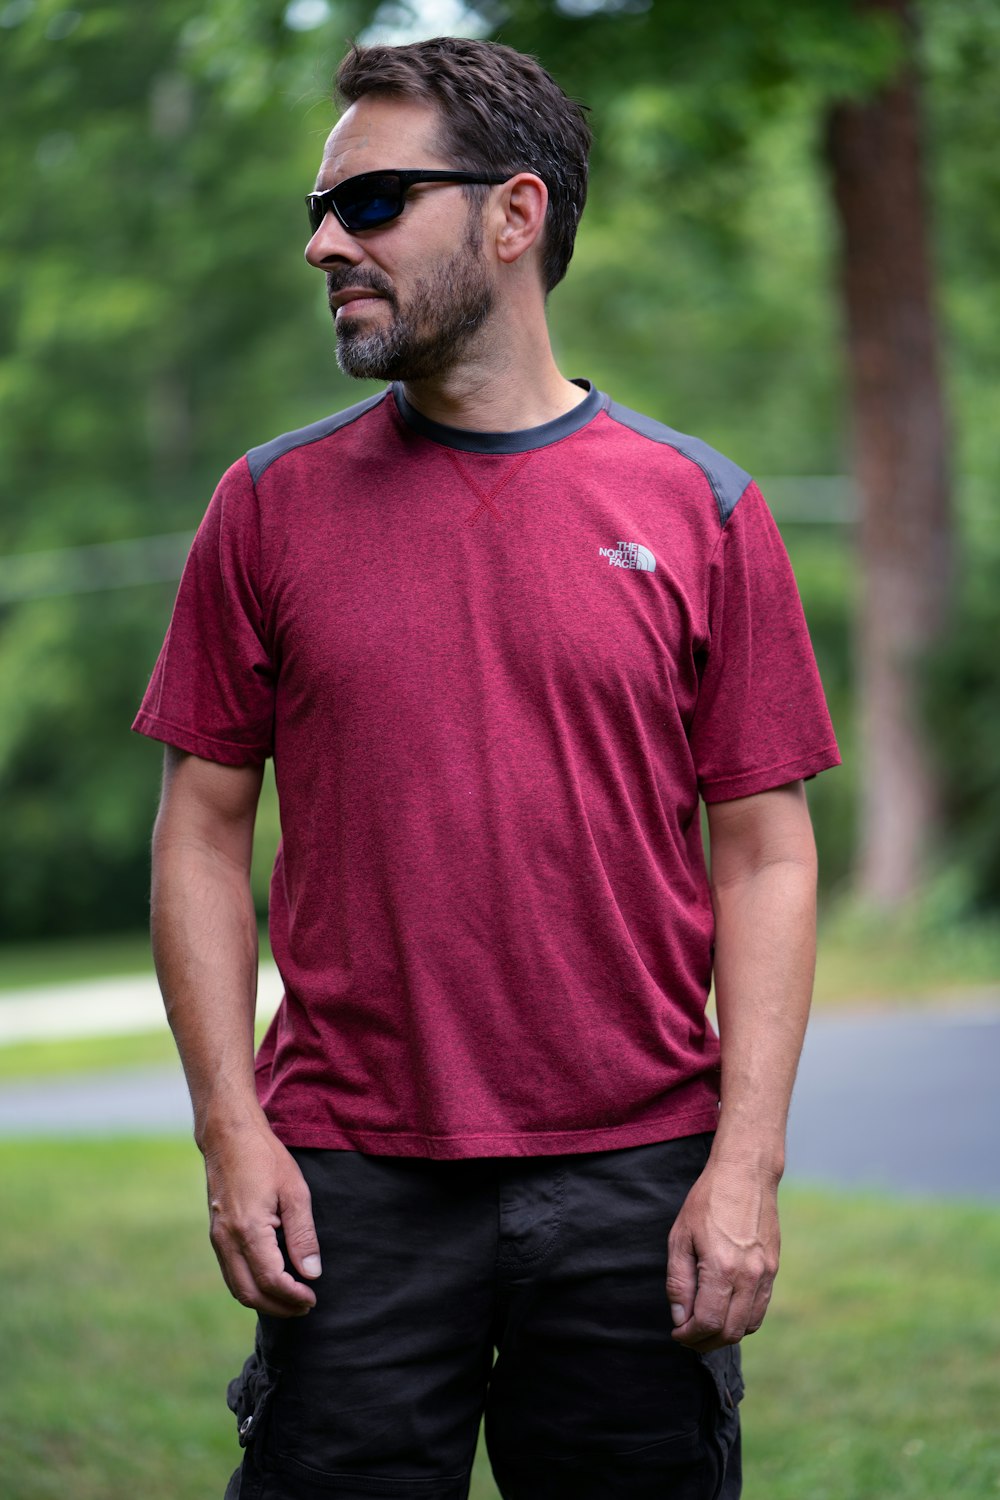 Man in red nike crew neck t-shirt standing on green grass field during  daytime photo – Free Apparel Image on Unsplash